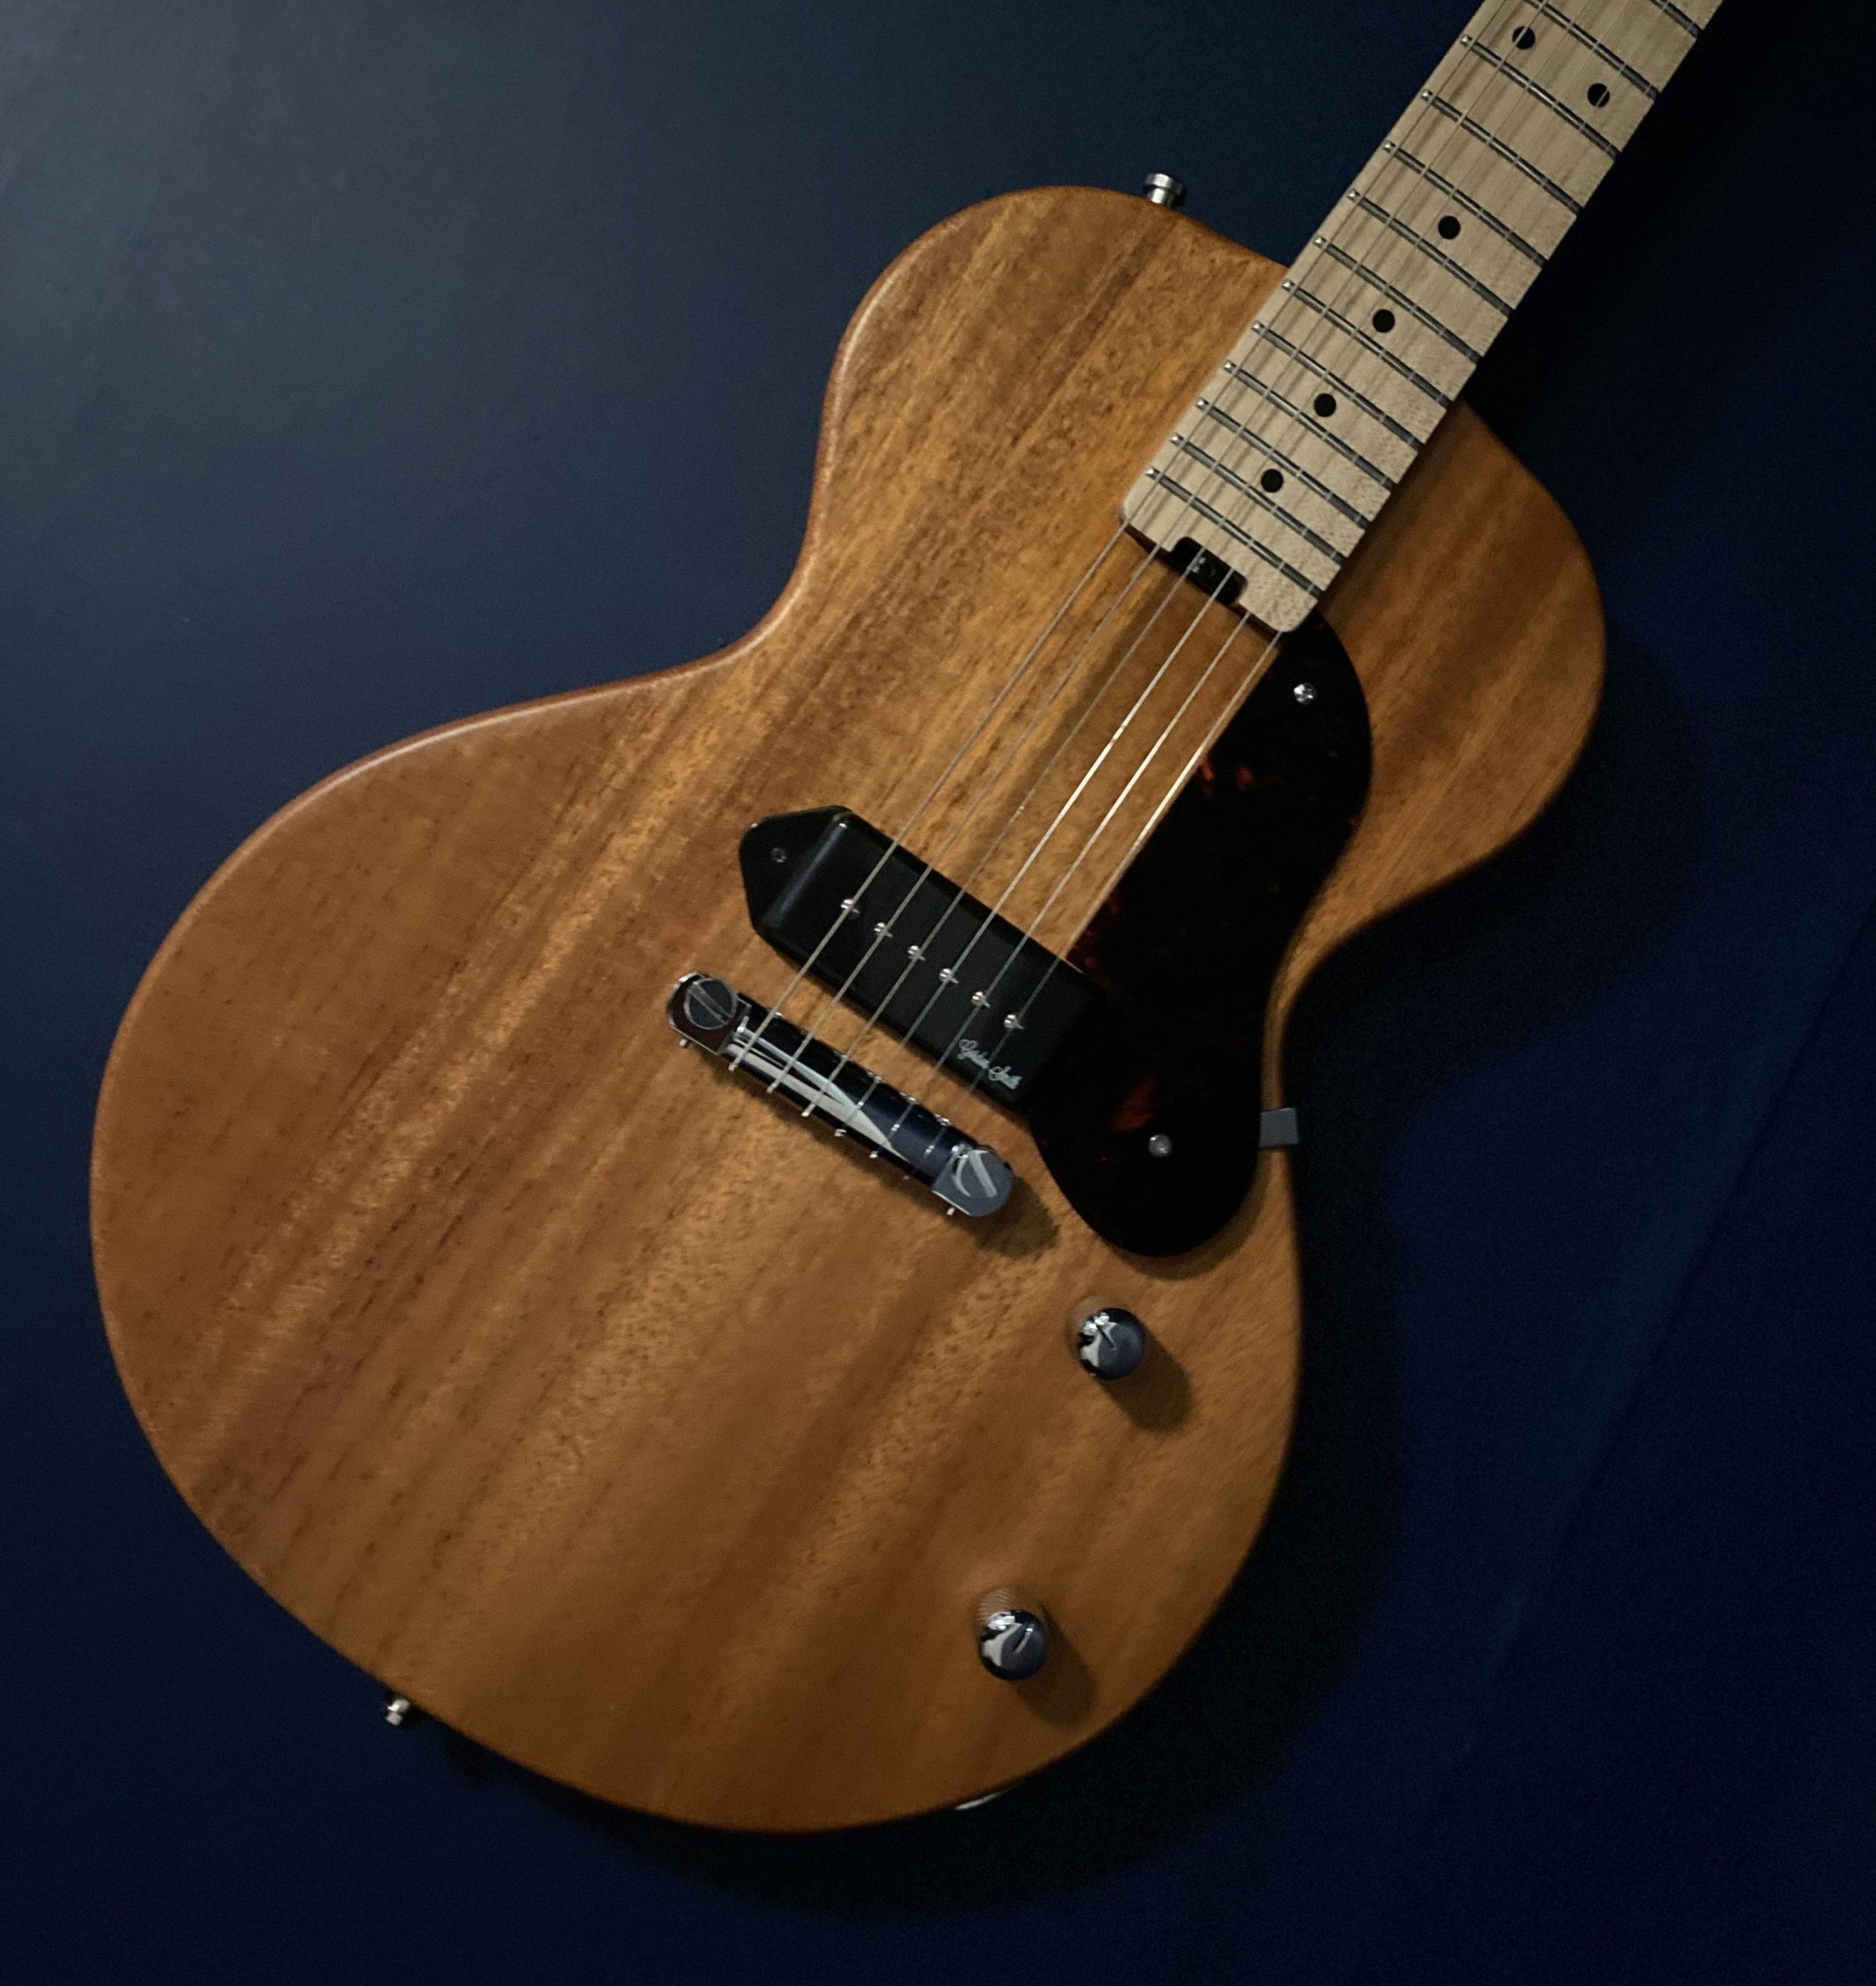 Gordon Smith GS No-Cut Natural Mahogany Maple Neck, Electric Guitar for sale at Richards Guitars.